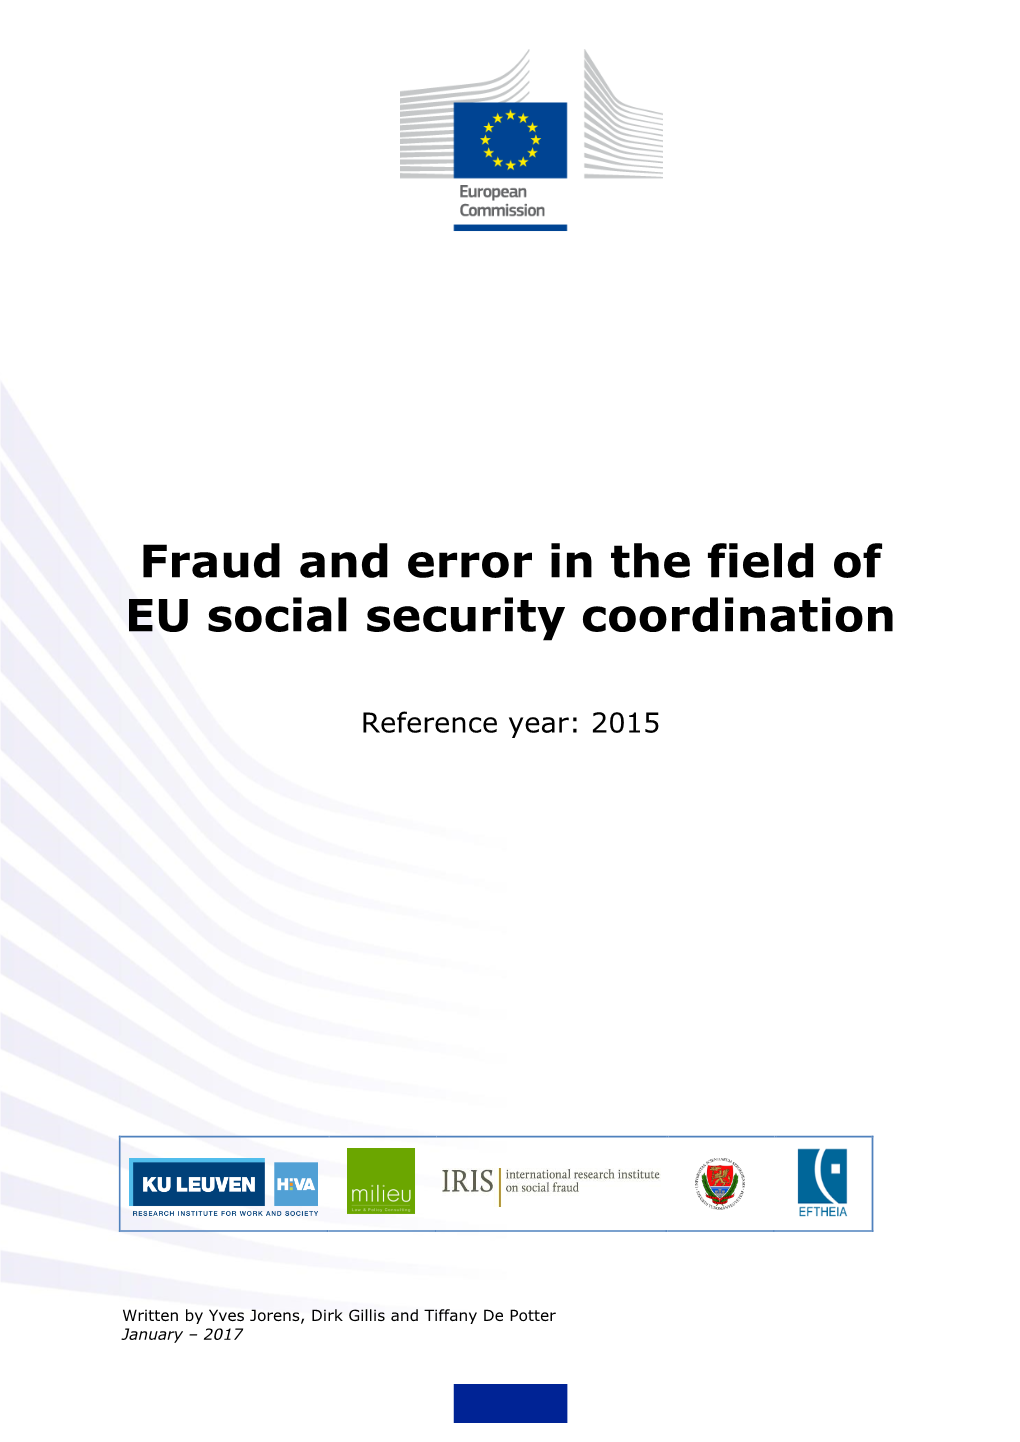 Fraud and Error in the Field of EU Social Security Coordination